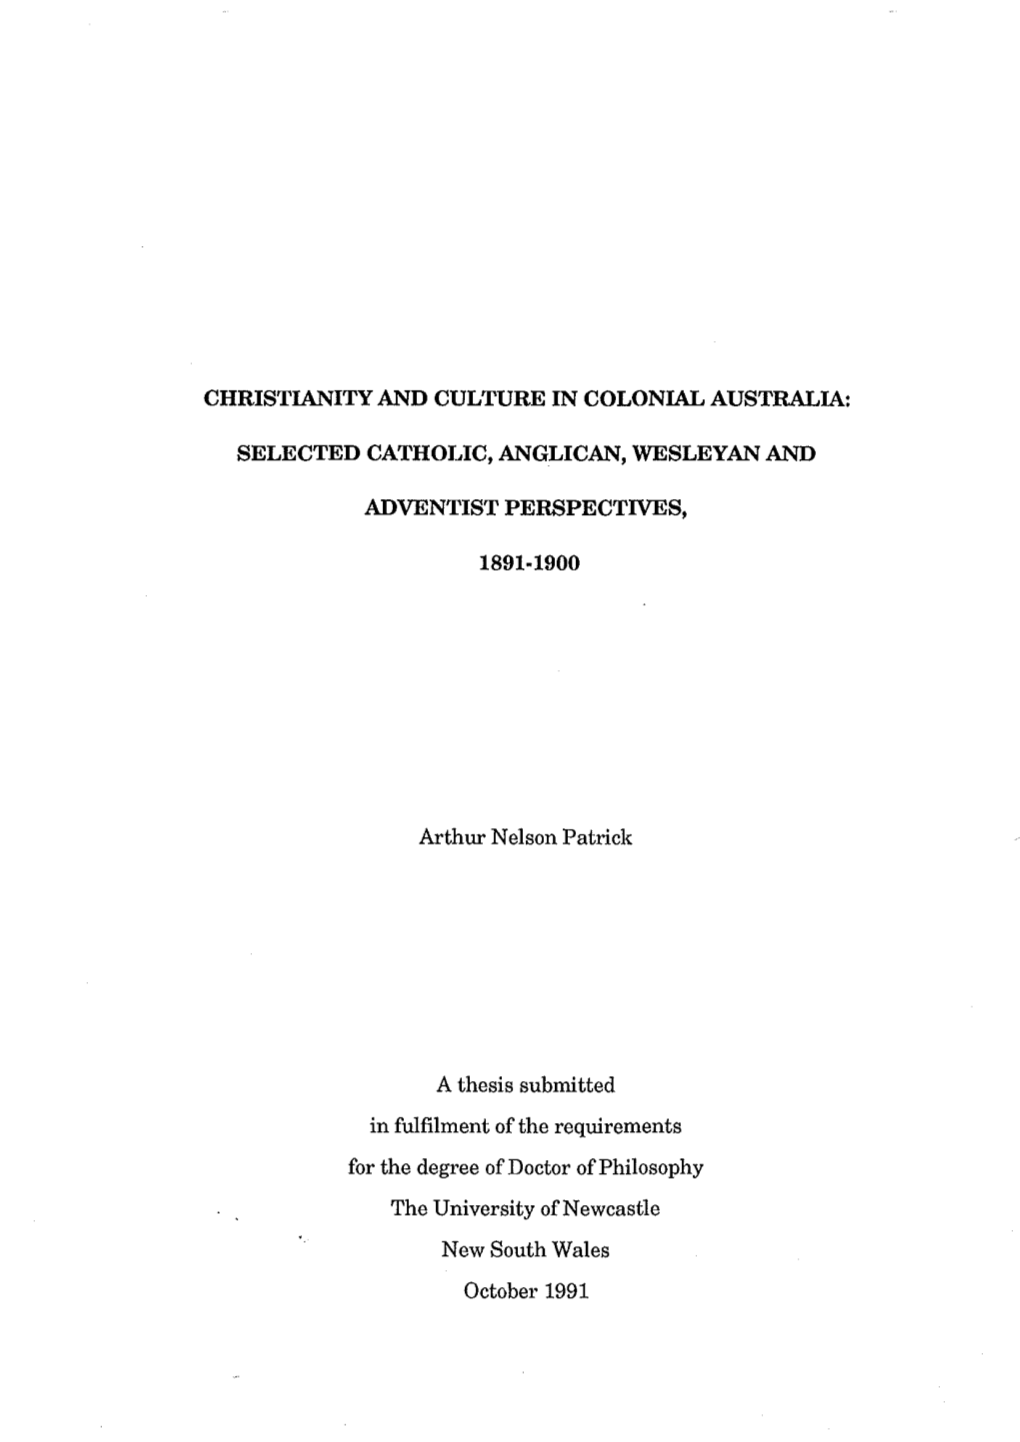 Christianity and Culture in Colonial Australia